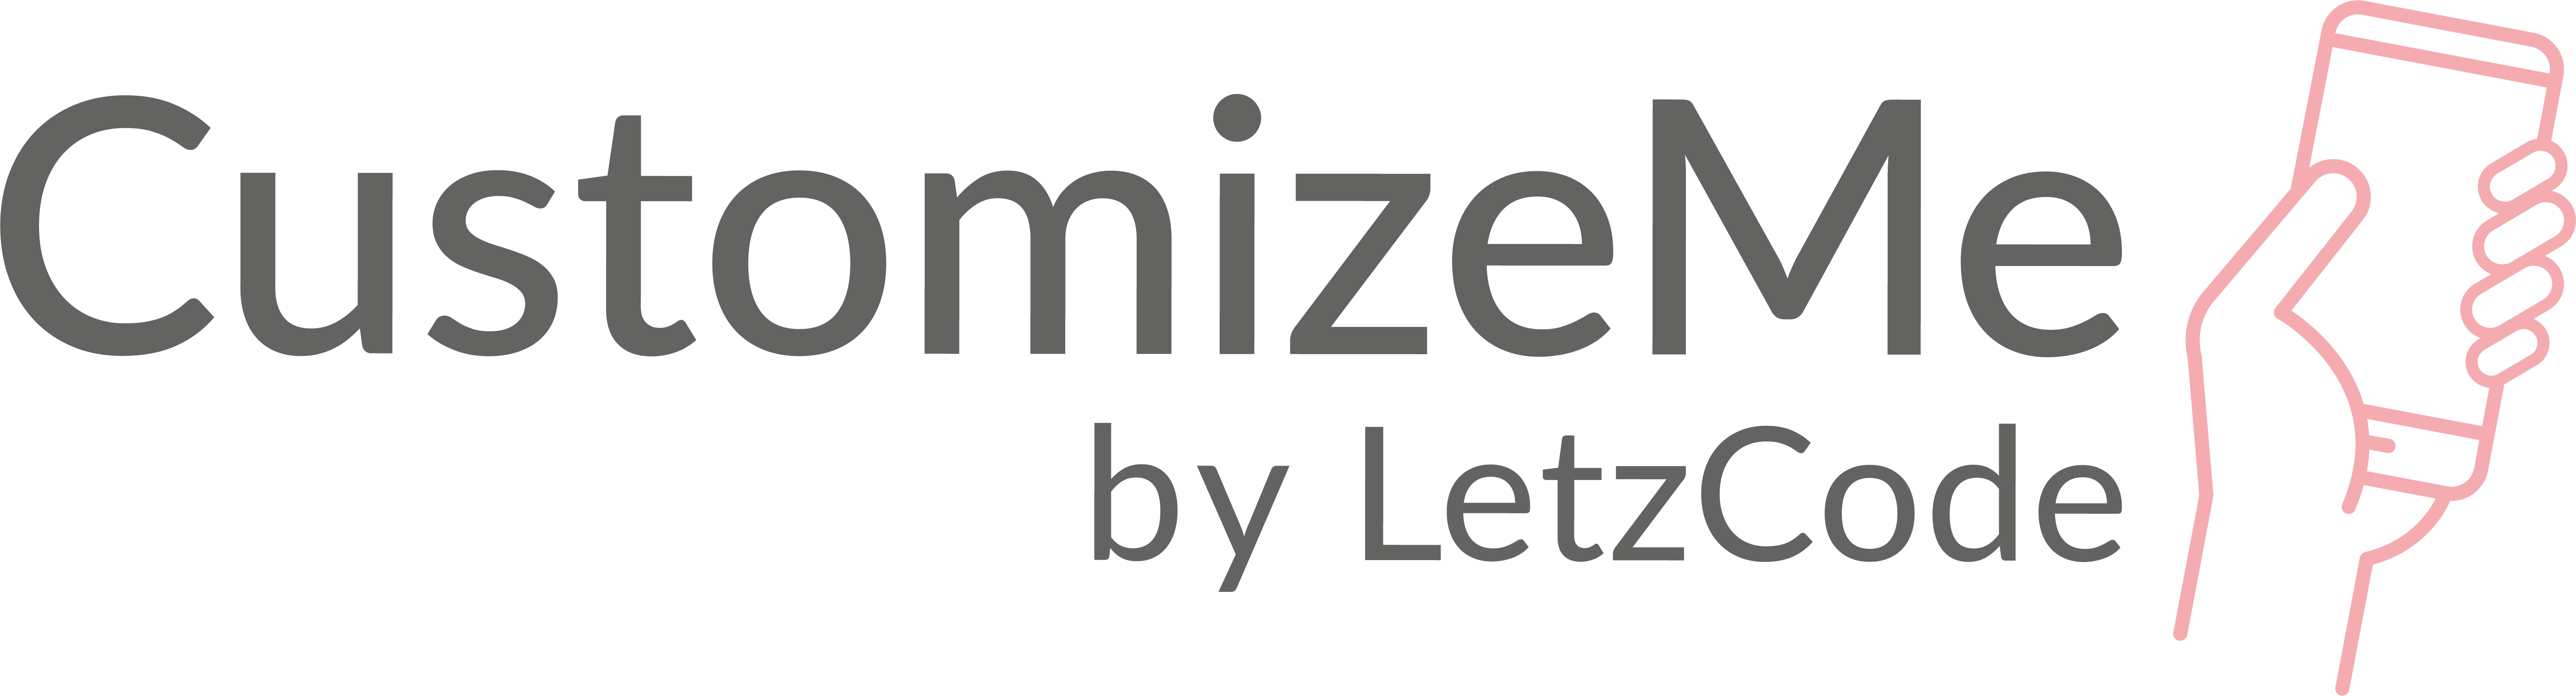 CustomizeMe | innovative low-code 3D AR platform for your business by LetzCode